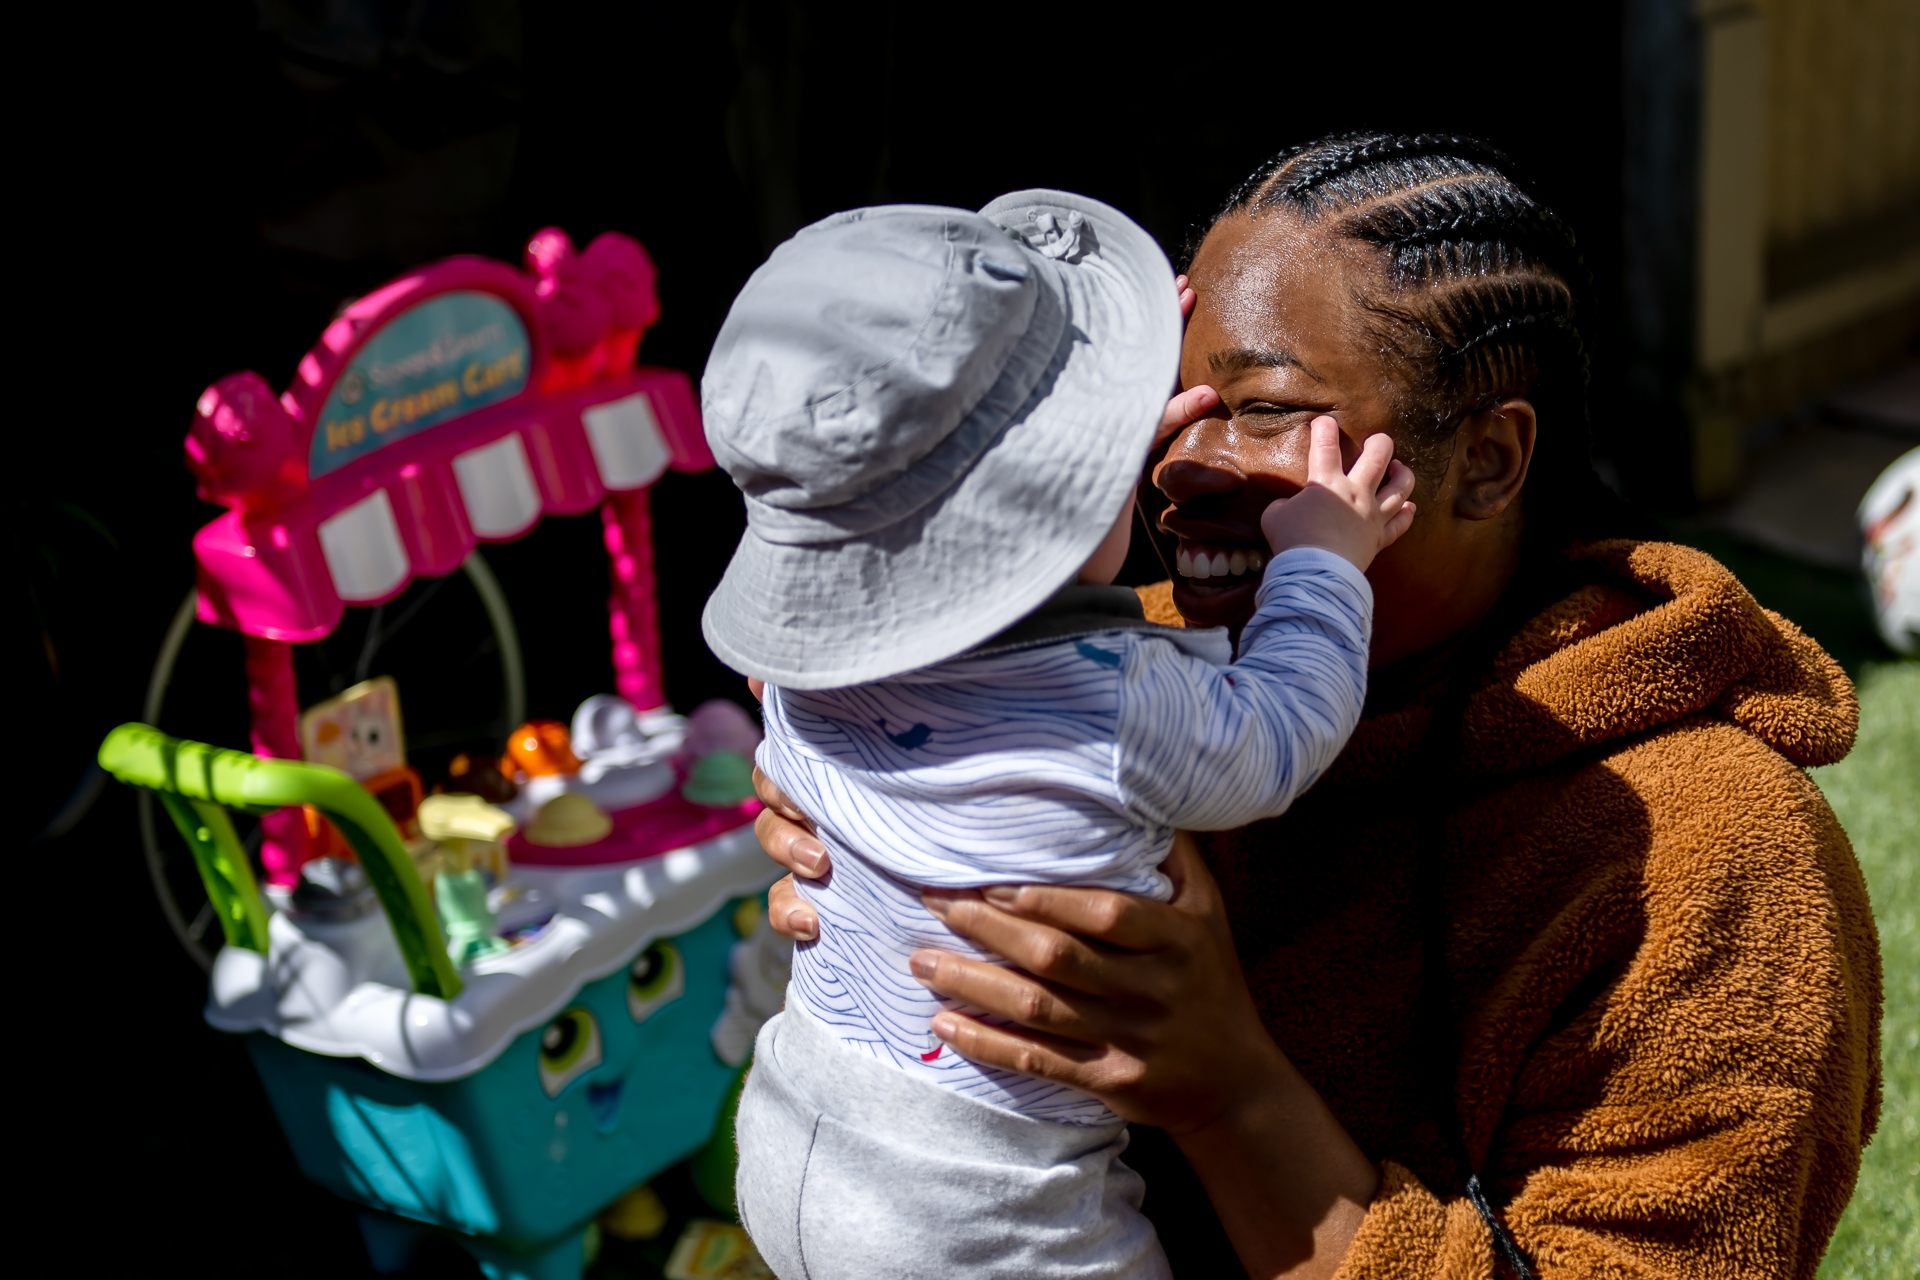 A Black woman holds a small child up to her face while smiling. The child touches her face.